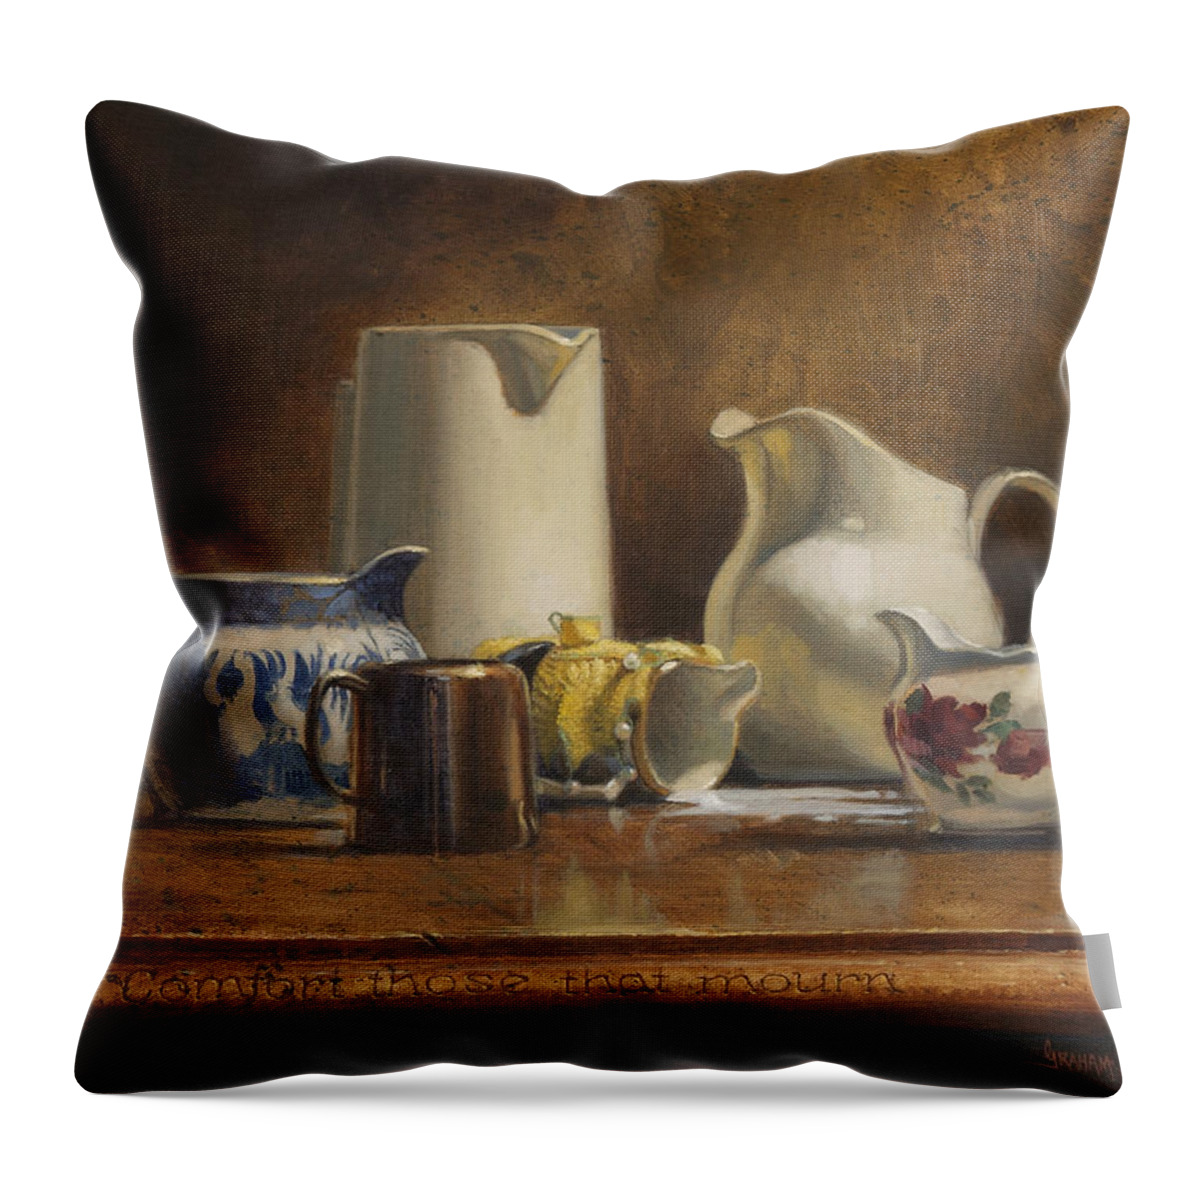 Humorous Throw Pillow featuring the painting Comfort those that Mourn by Graham Braddock